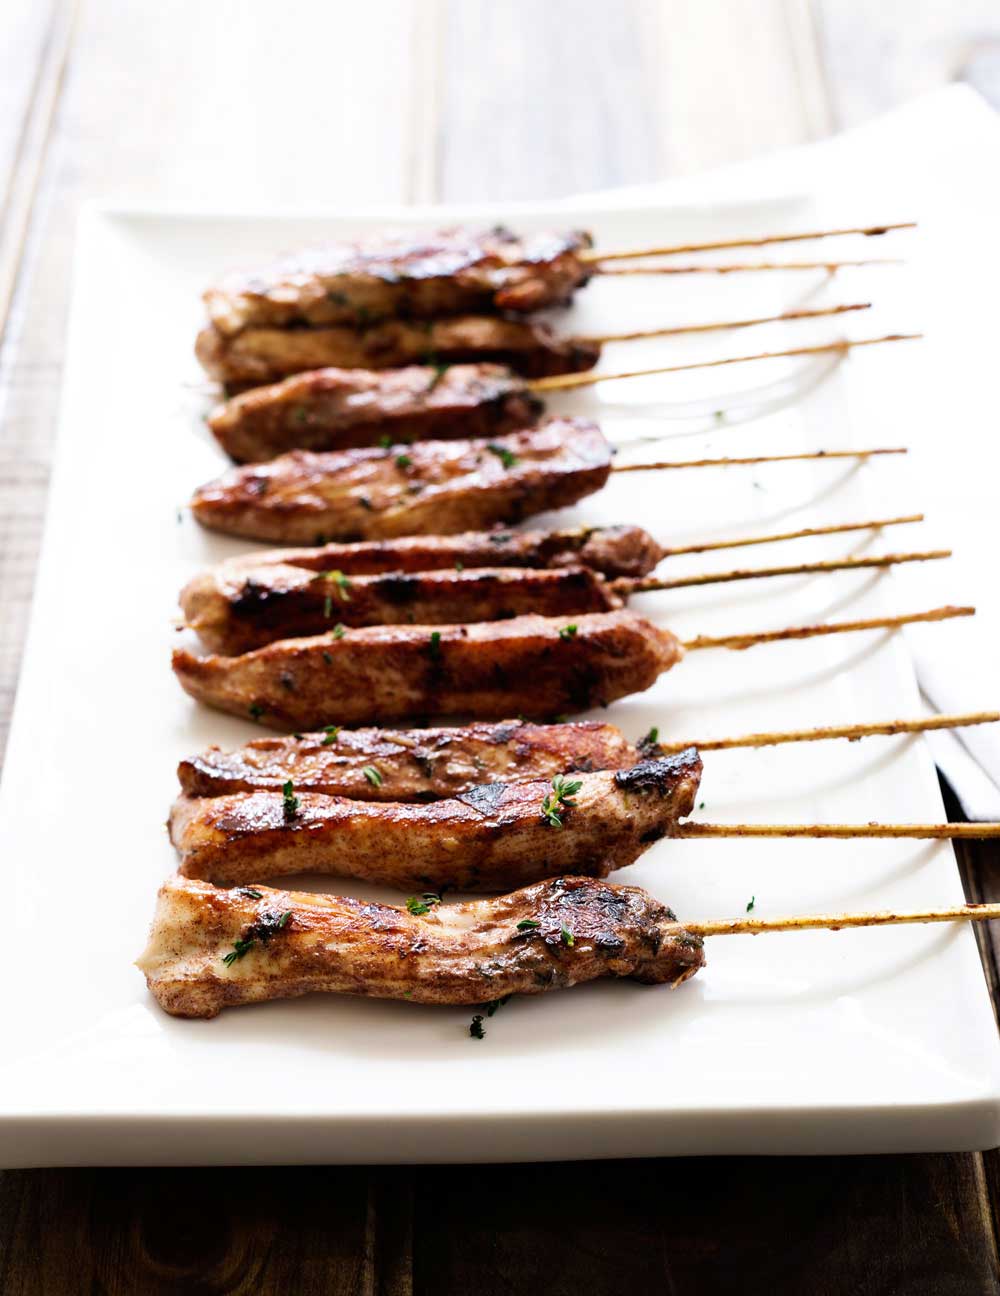 Cinnamon and Thyme Chicken Skewers. Sweet cinnamon and floral thyme give these chicken skewers a wonderful and unusual mix of flavours. A winning dinner!